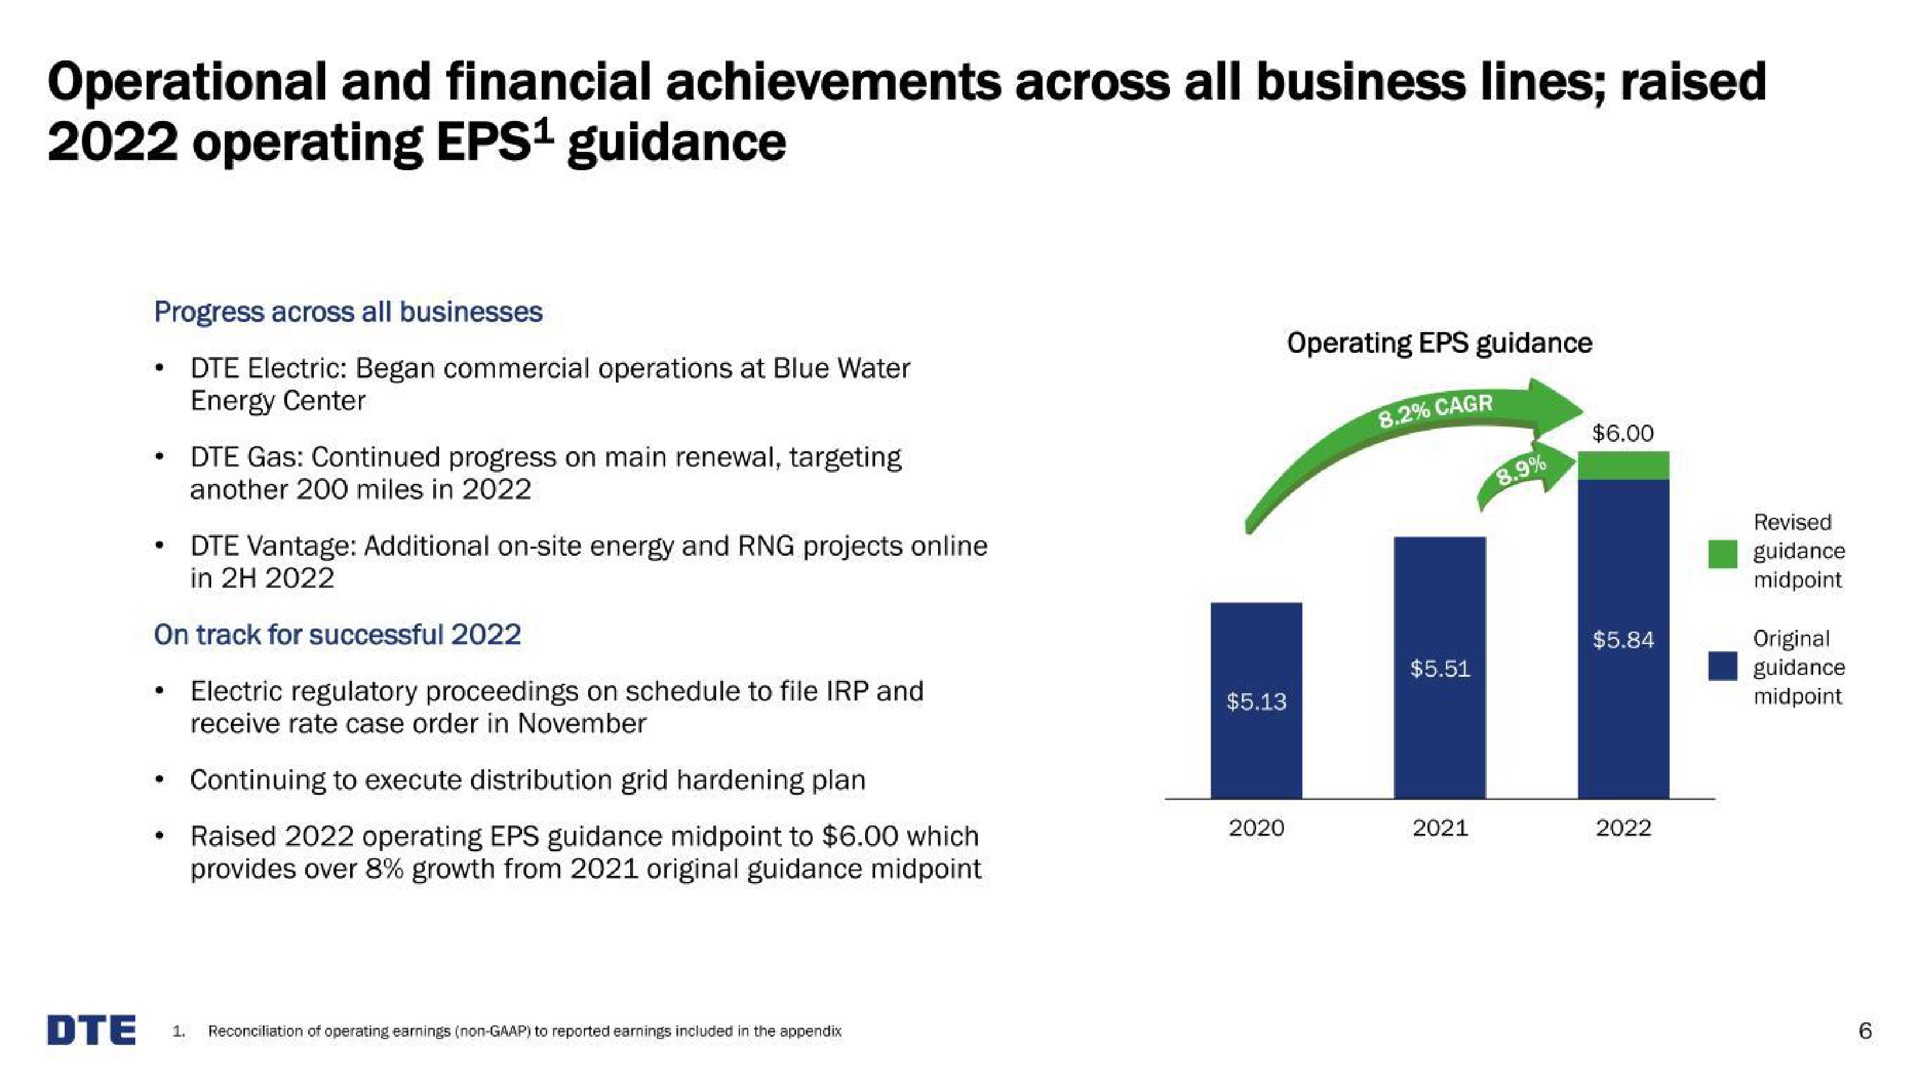 operational and financial achievements across all business lines raised operating guidance | DTE Electric